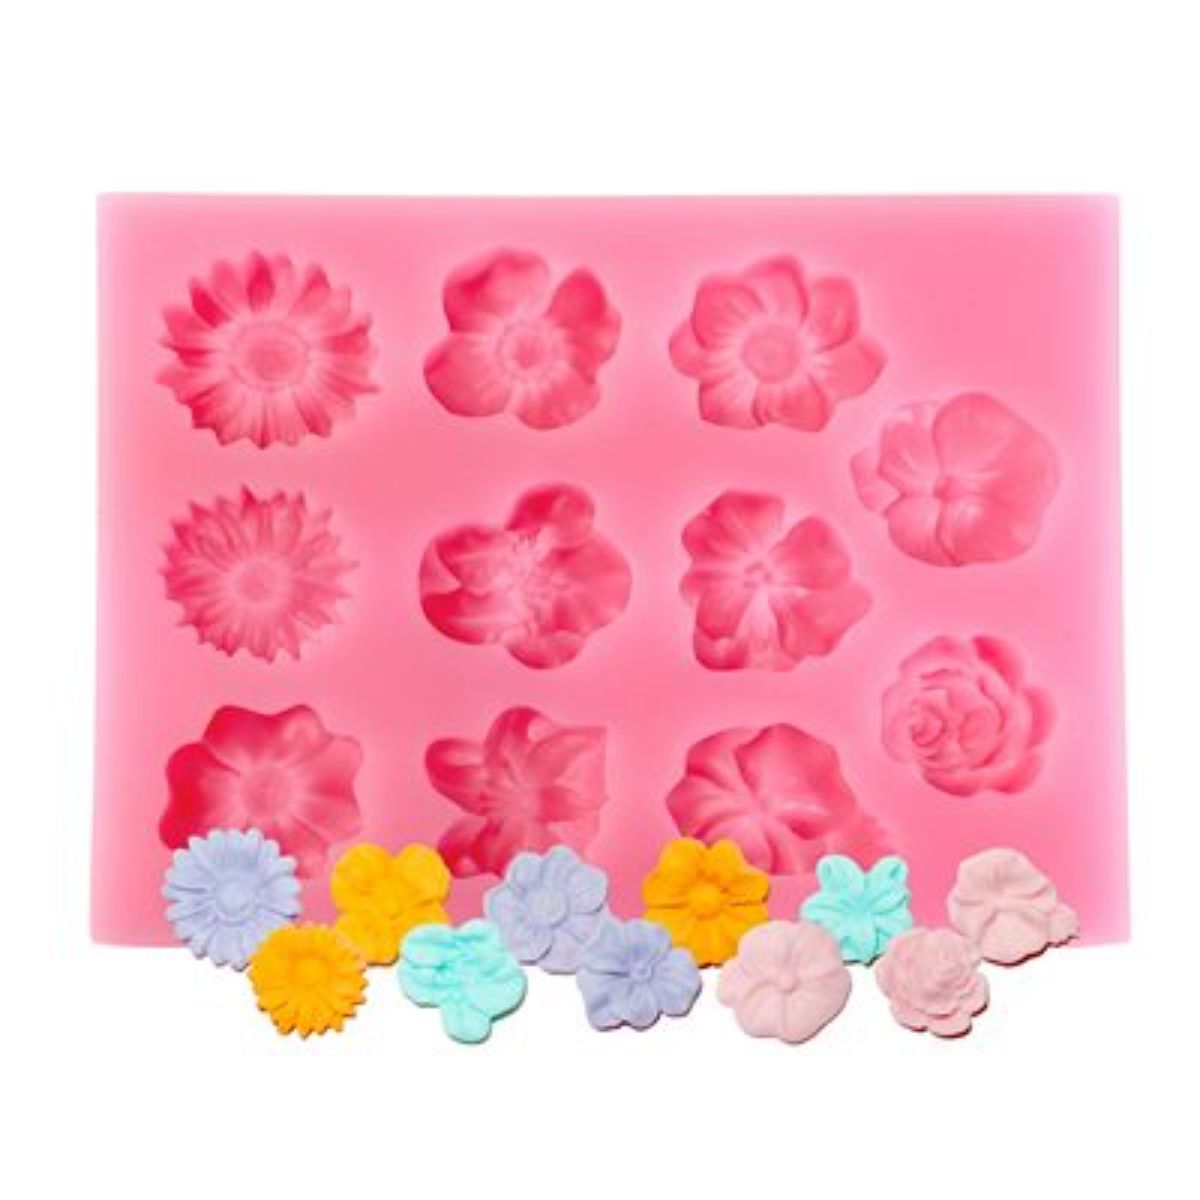 CK Products Flower Assortment Chocolate Mold